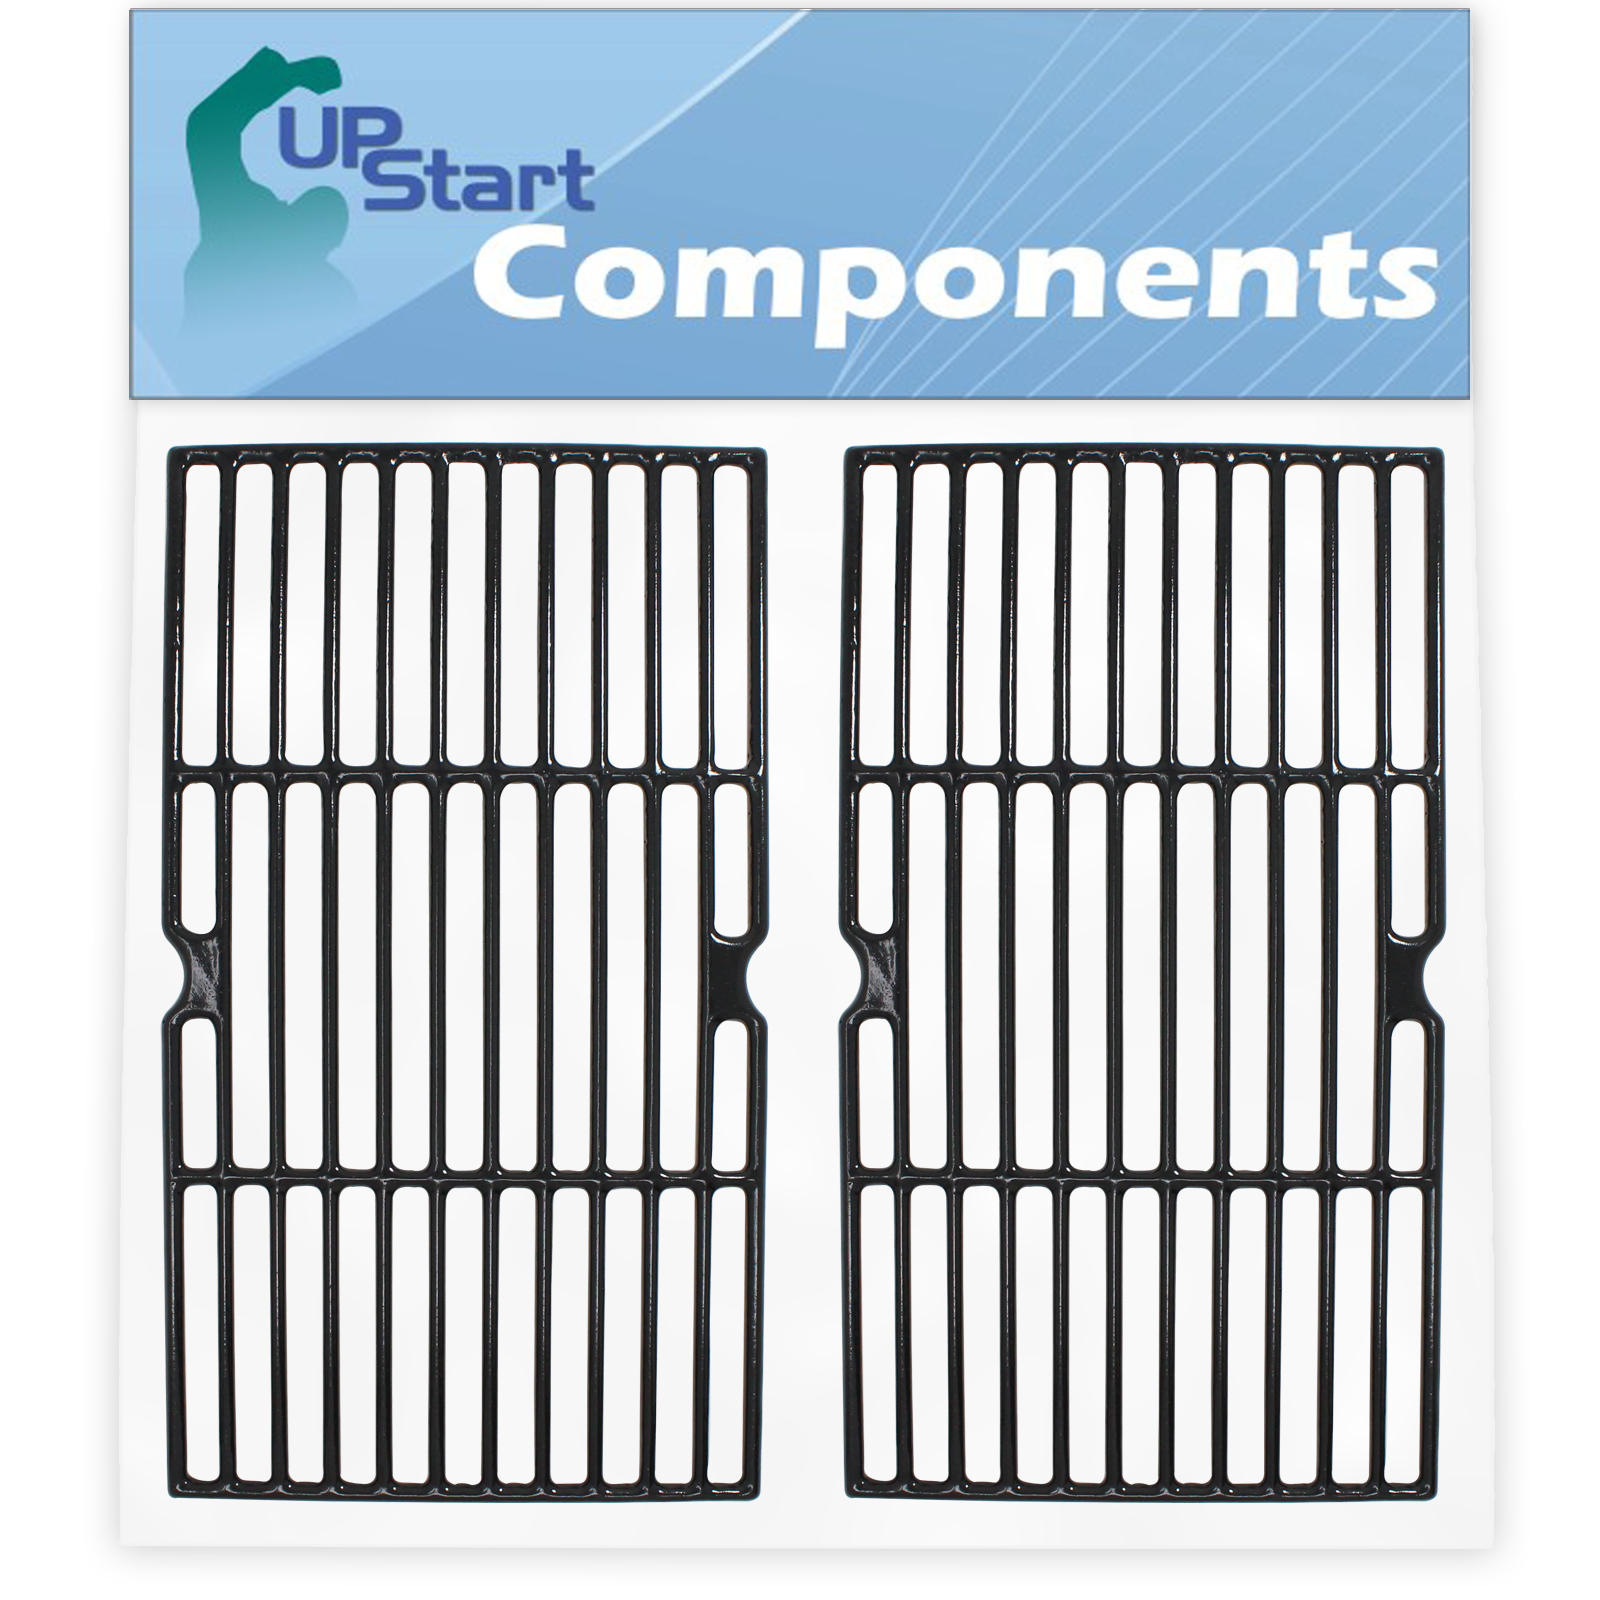 2 Pack BBQ Grill Cooking Grates Replacement for Broil King Sovereign 90, Broil King Sovereign 20, Broil King Sovereign 70, Charbroil 463251605, Charbroil 463251713, 463240904 - Cast Iron Grid 16 3/4" - image 1 of 4